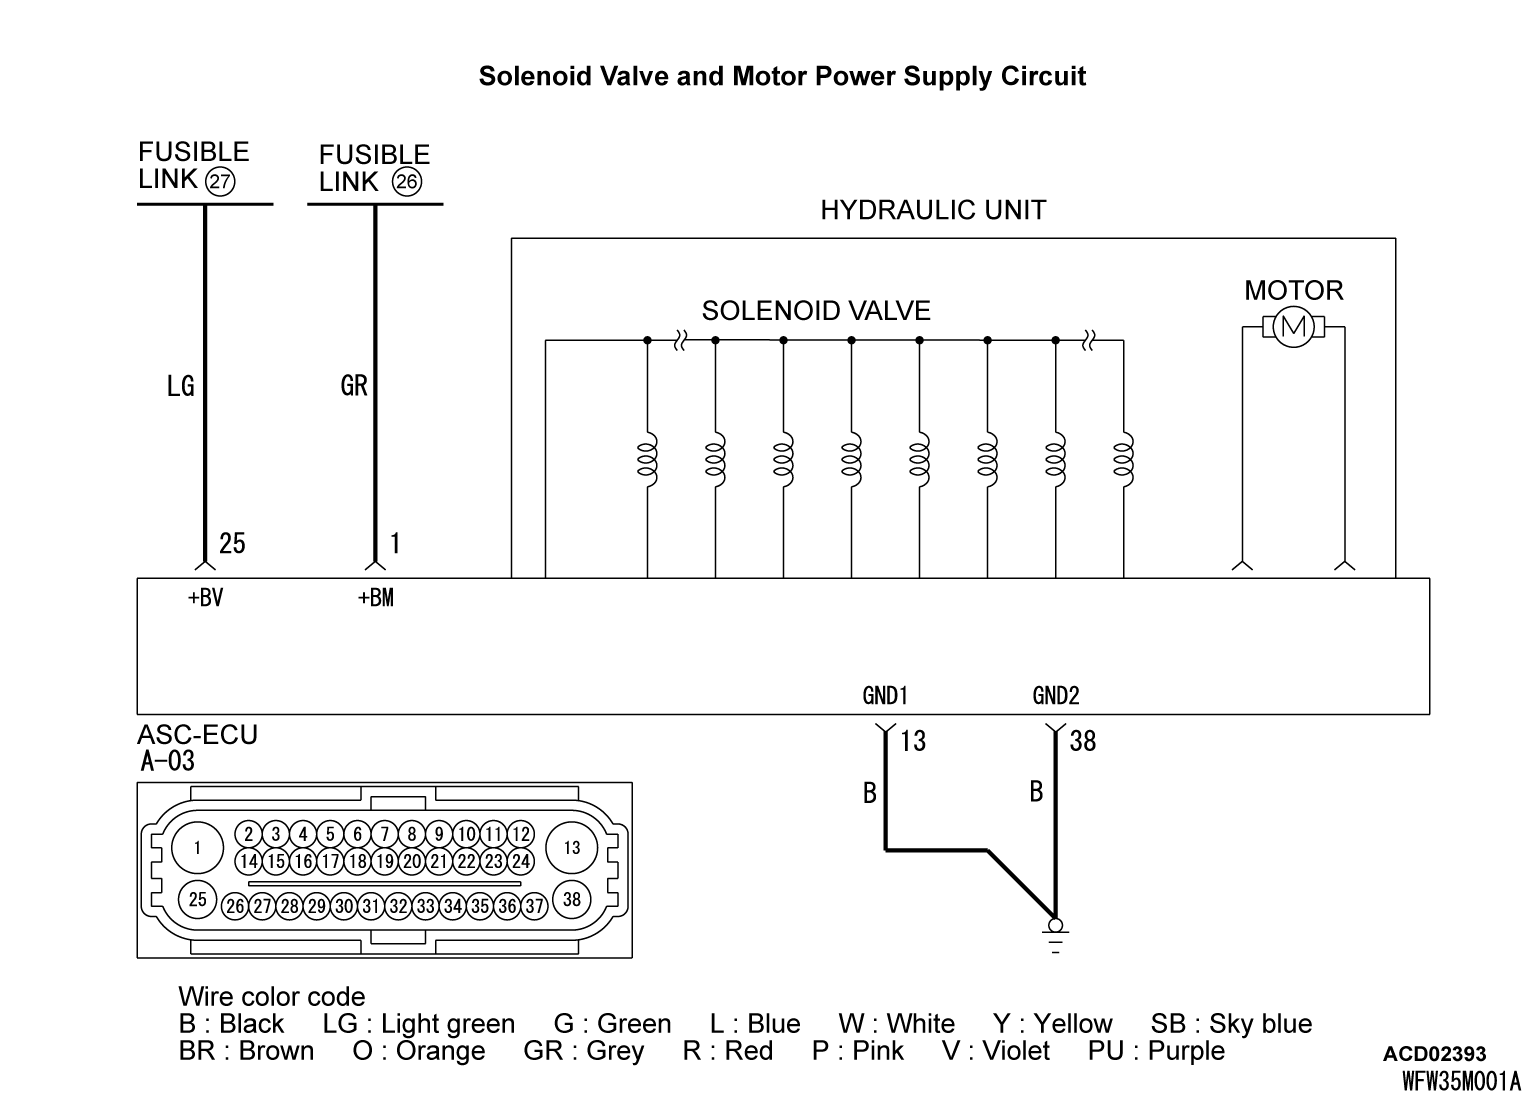 35C-DTC C2116: ABNORMALITY IN POWER SUPPLY VOLTAGE IN PUMP MOTOR